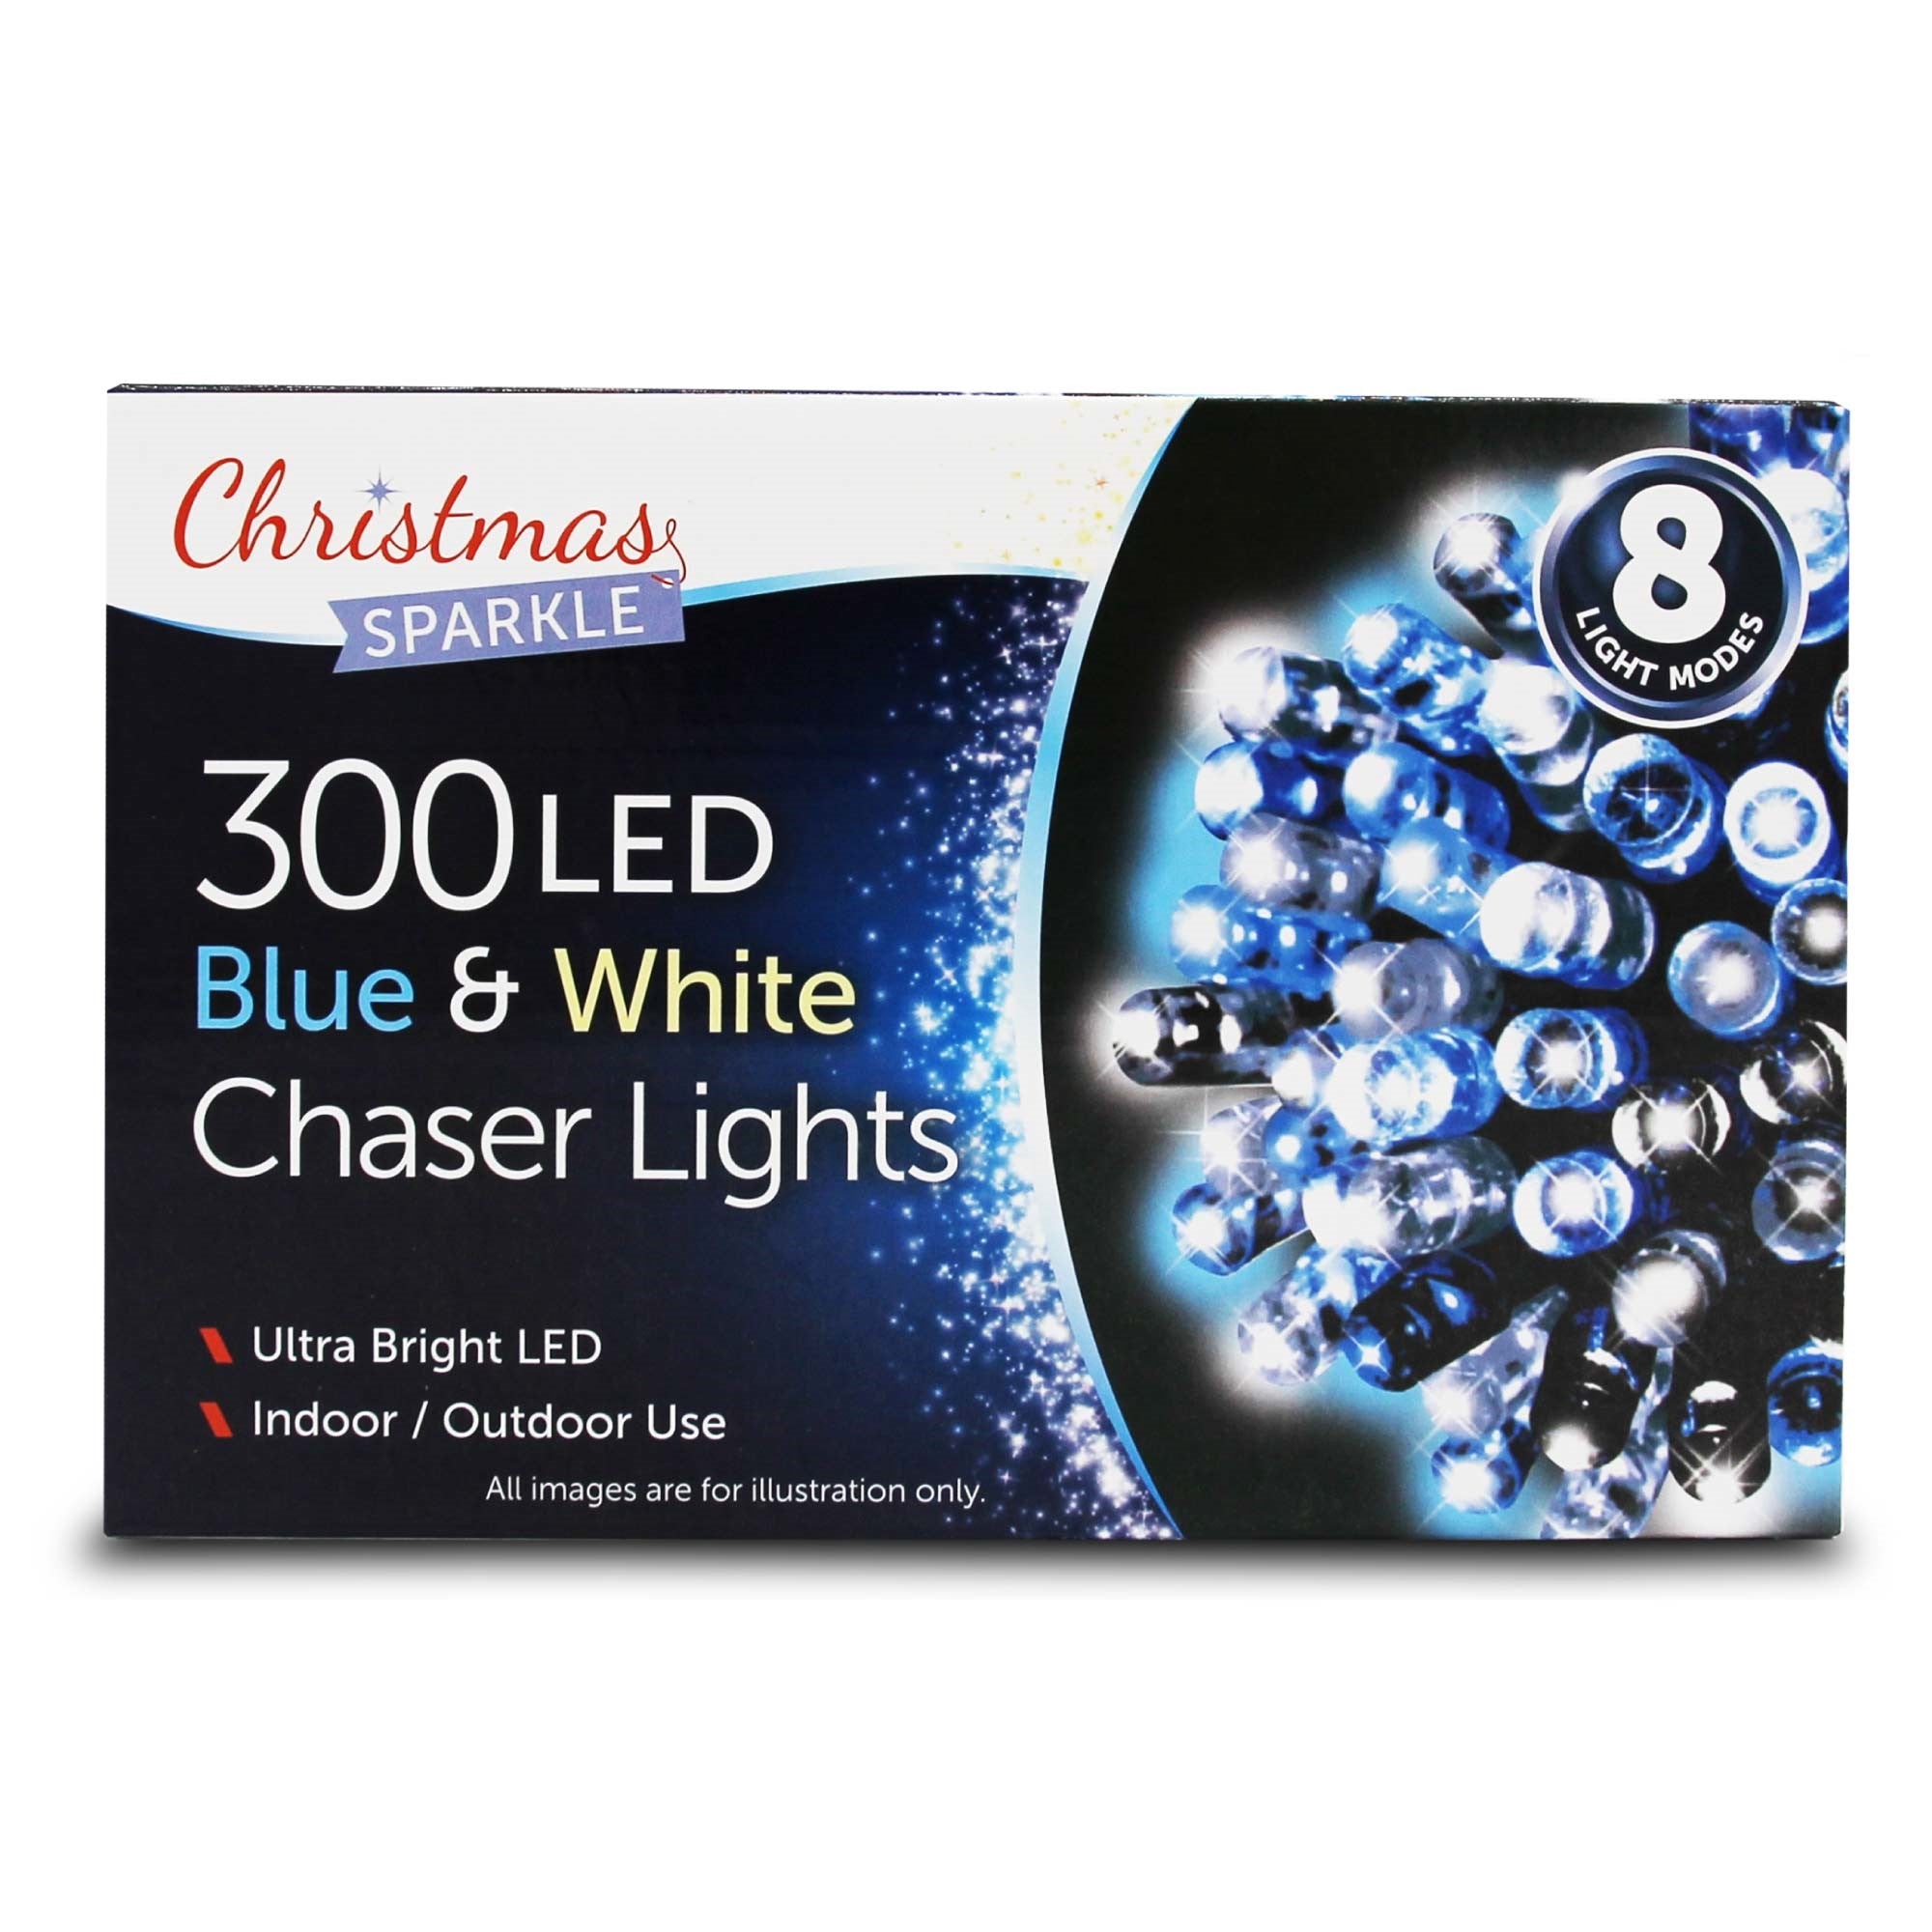 Christmas Sparkle Indoor and Outdoor Chaser Lights x 300 Blue and White LEDS - Mains Operated  | TJ Hughes